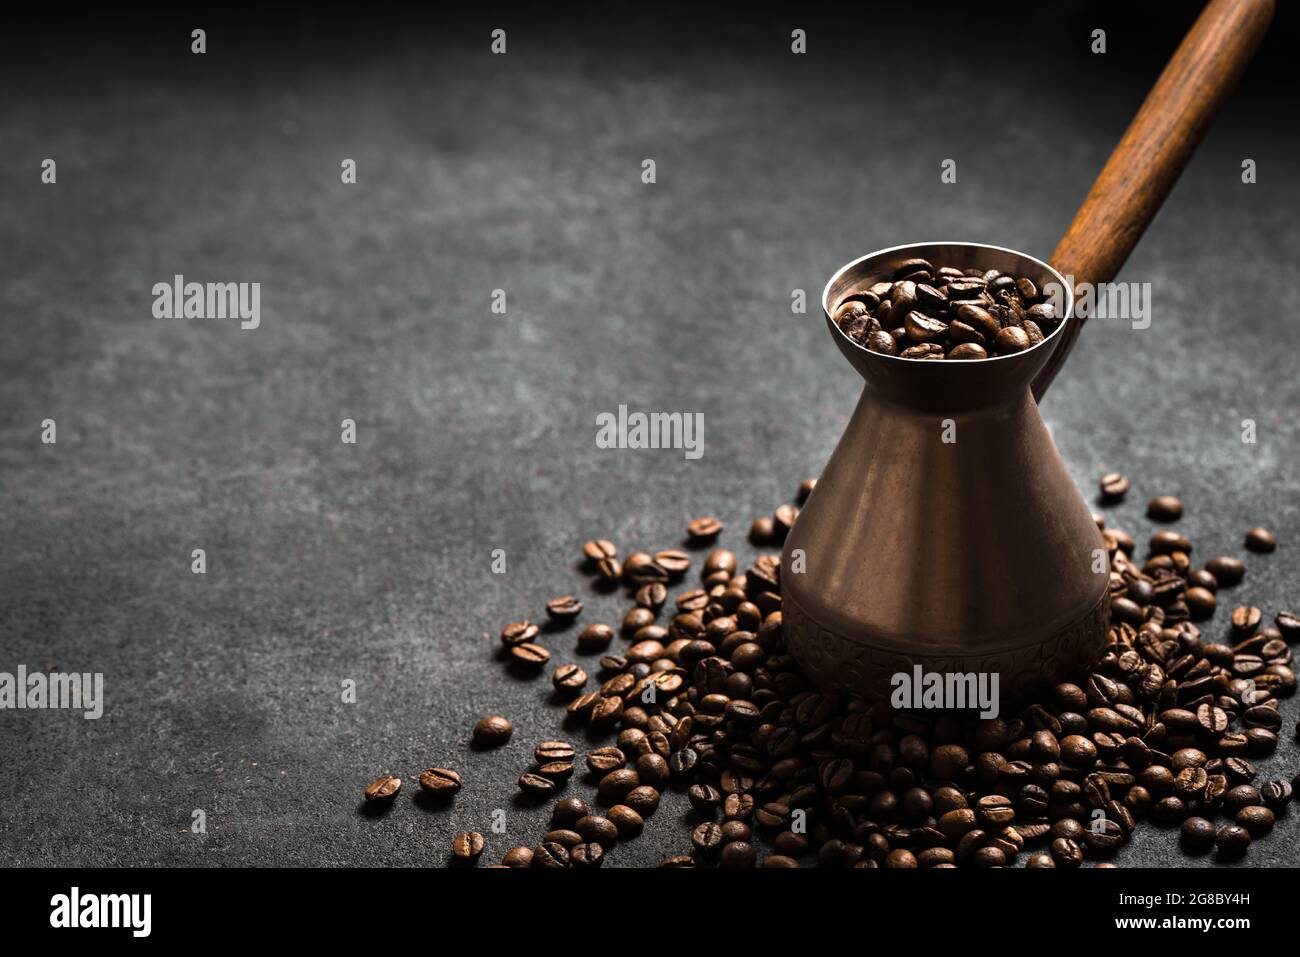 https://c8.alamy.com/comp/2G8BY4H/roasted-coffee-beans-and-turk-cezve-on-black-background-turkish-coffee-composition-banner-copy-space-2G8BY4H.jpg